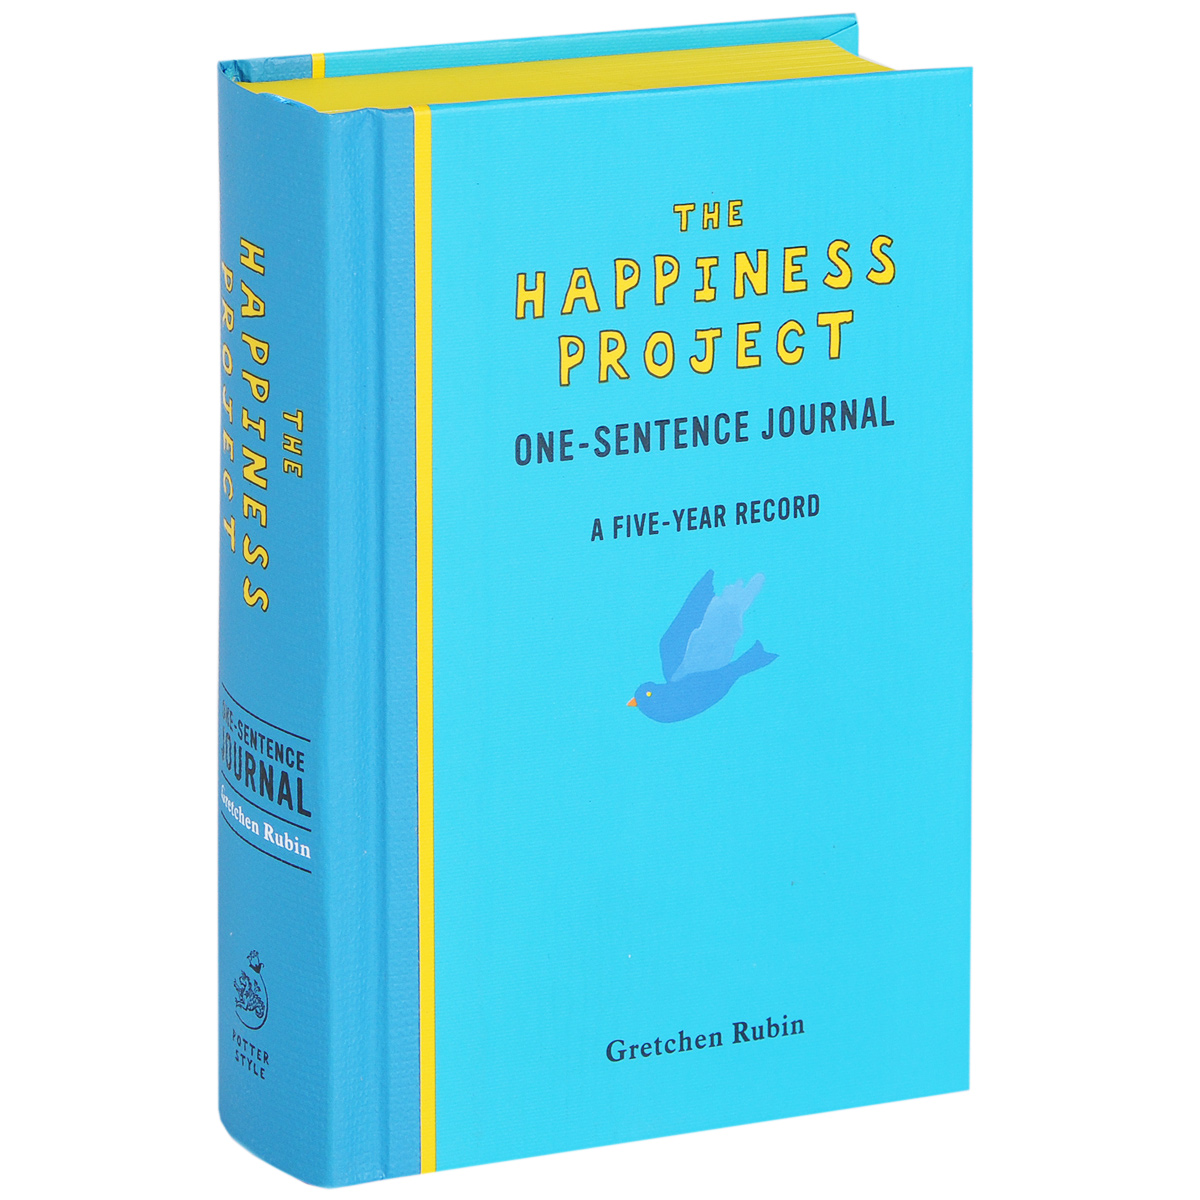 The Happiness Project: One-Sentence Journal: A Five-Year Record